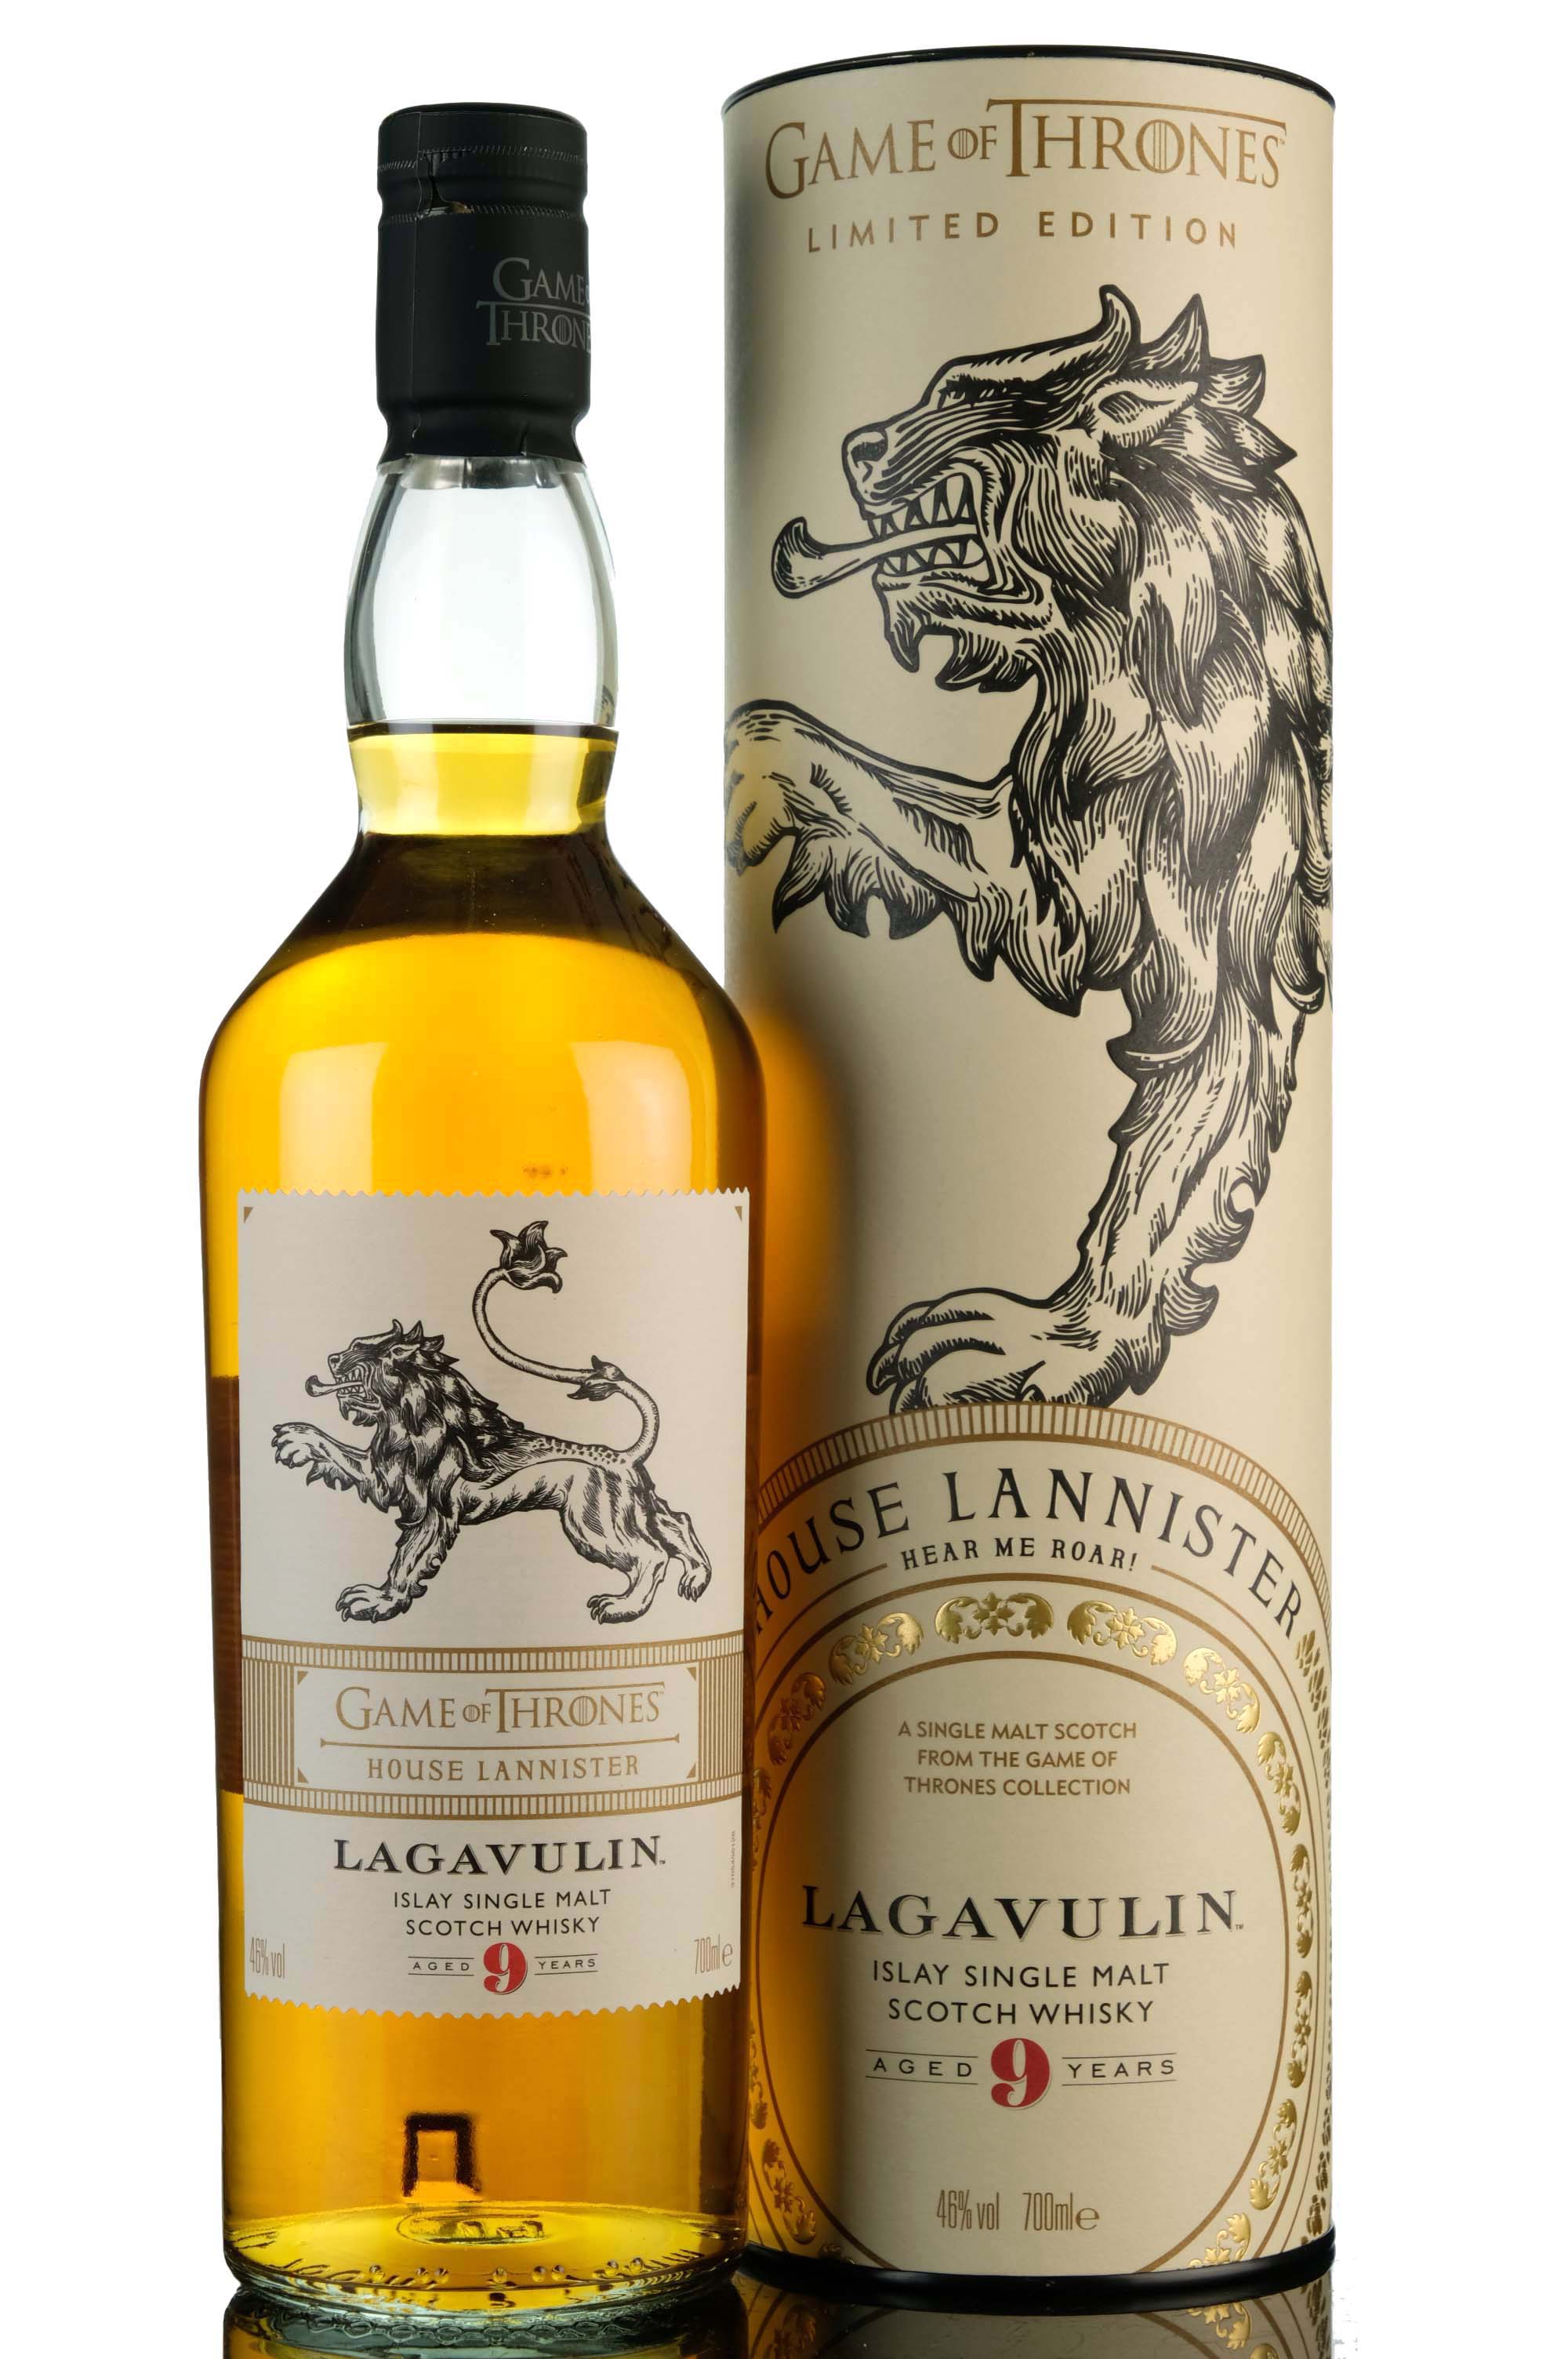 Lagavulin 9 Year Old - House Lannister Game of Thrones